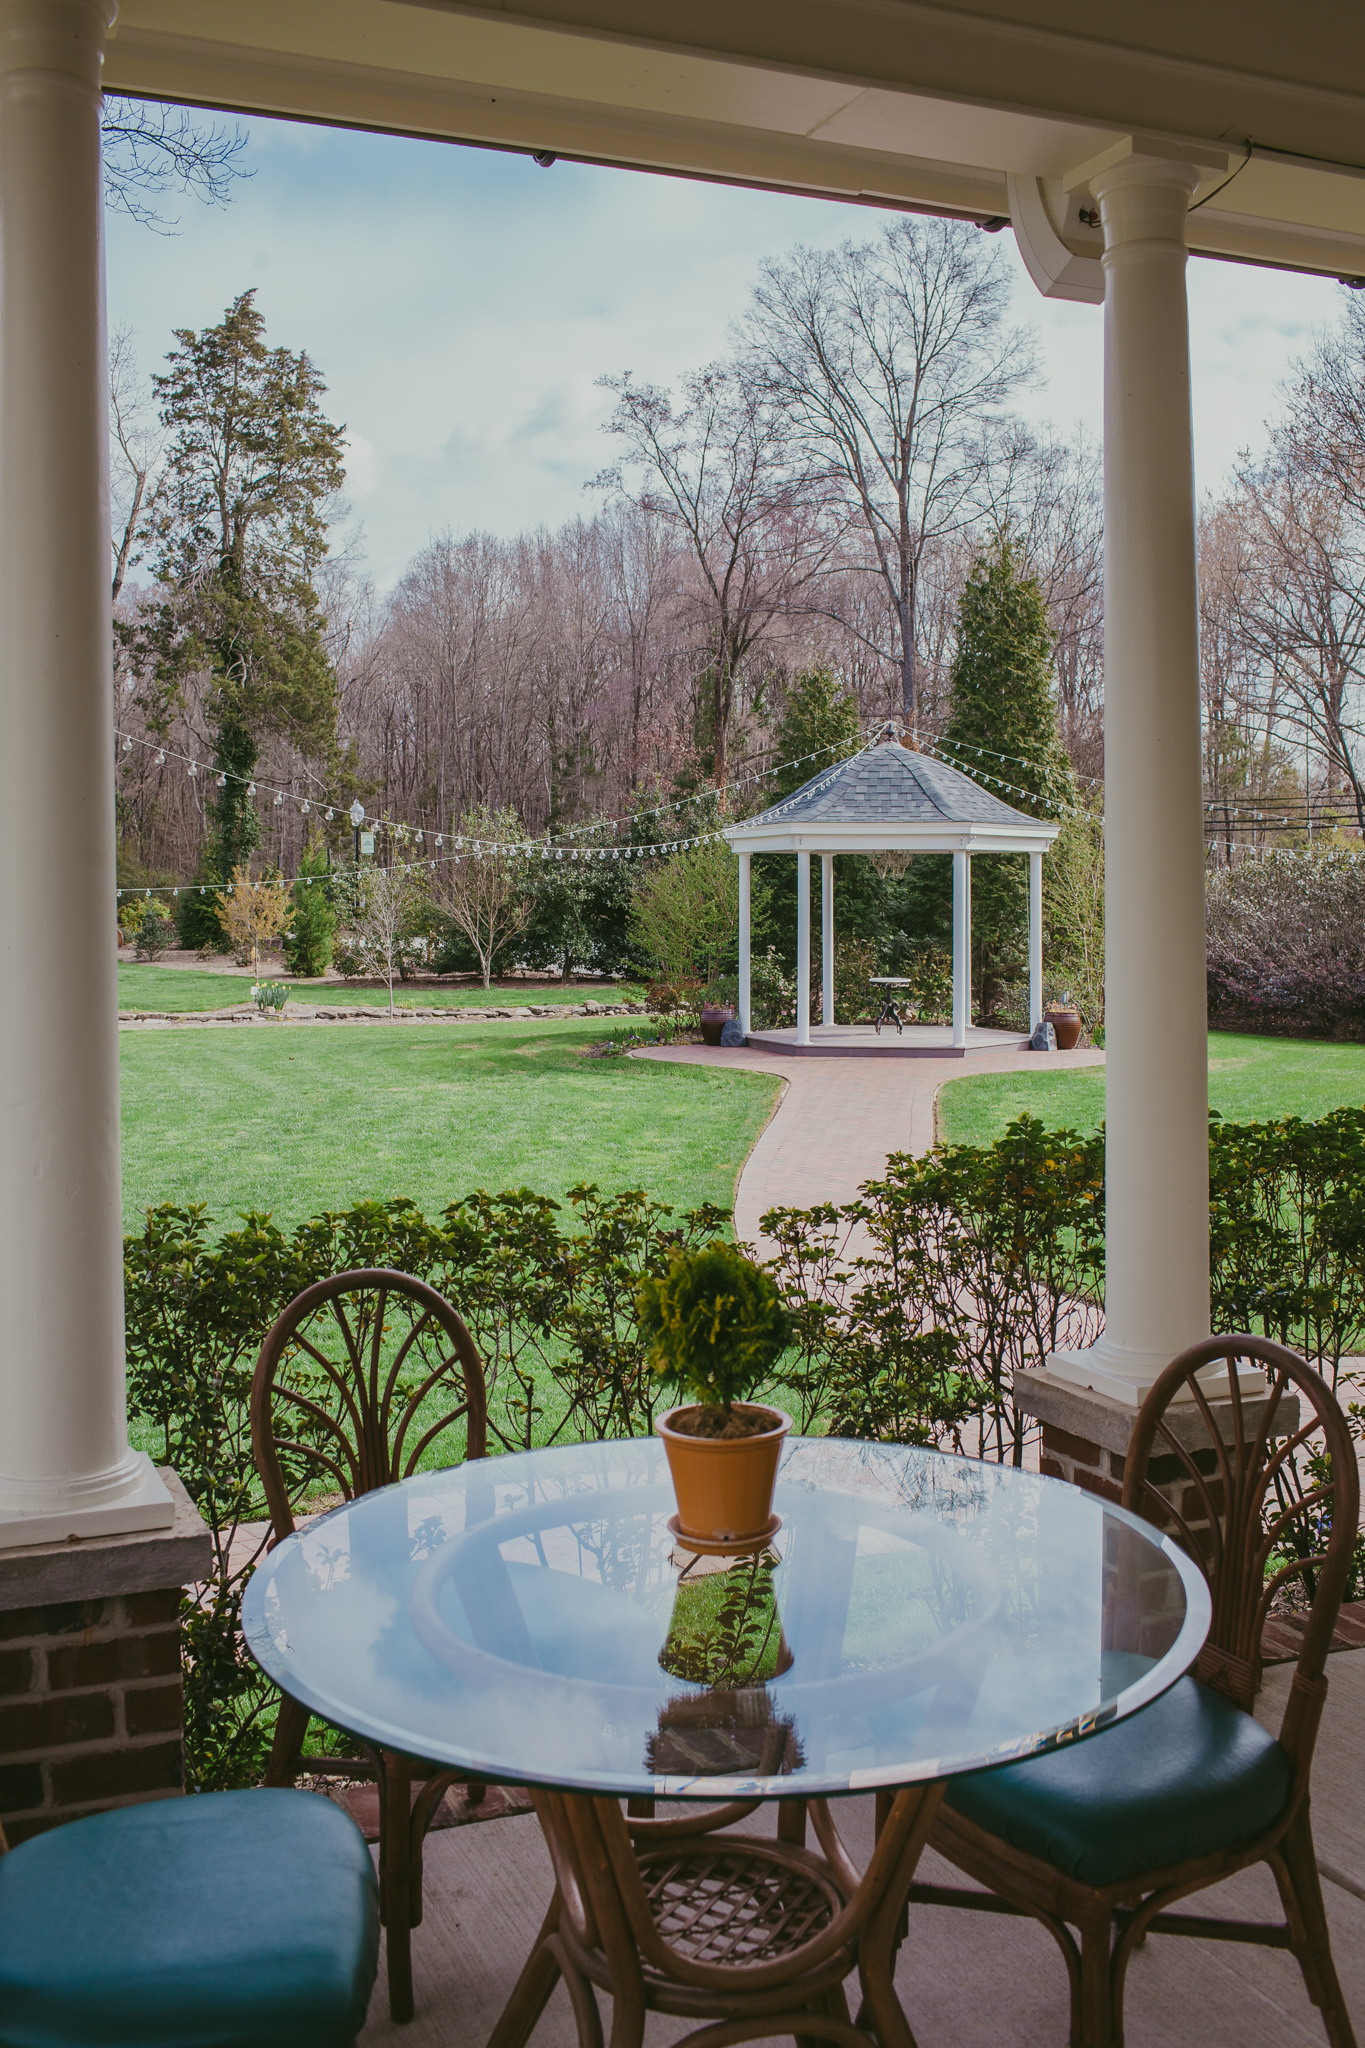 View of the gazebo from the front porch of the bridal suite at the Alexander Homestead